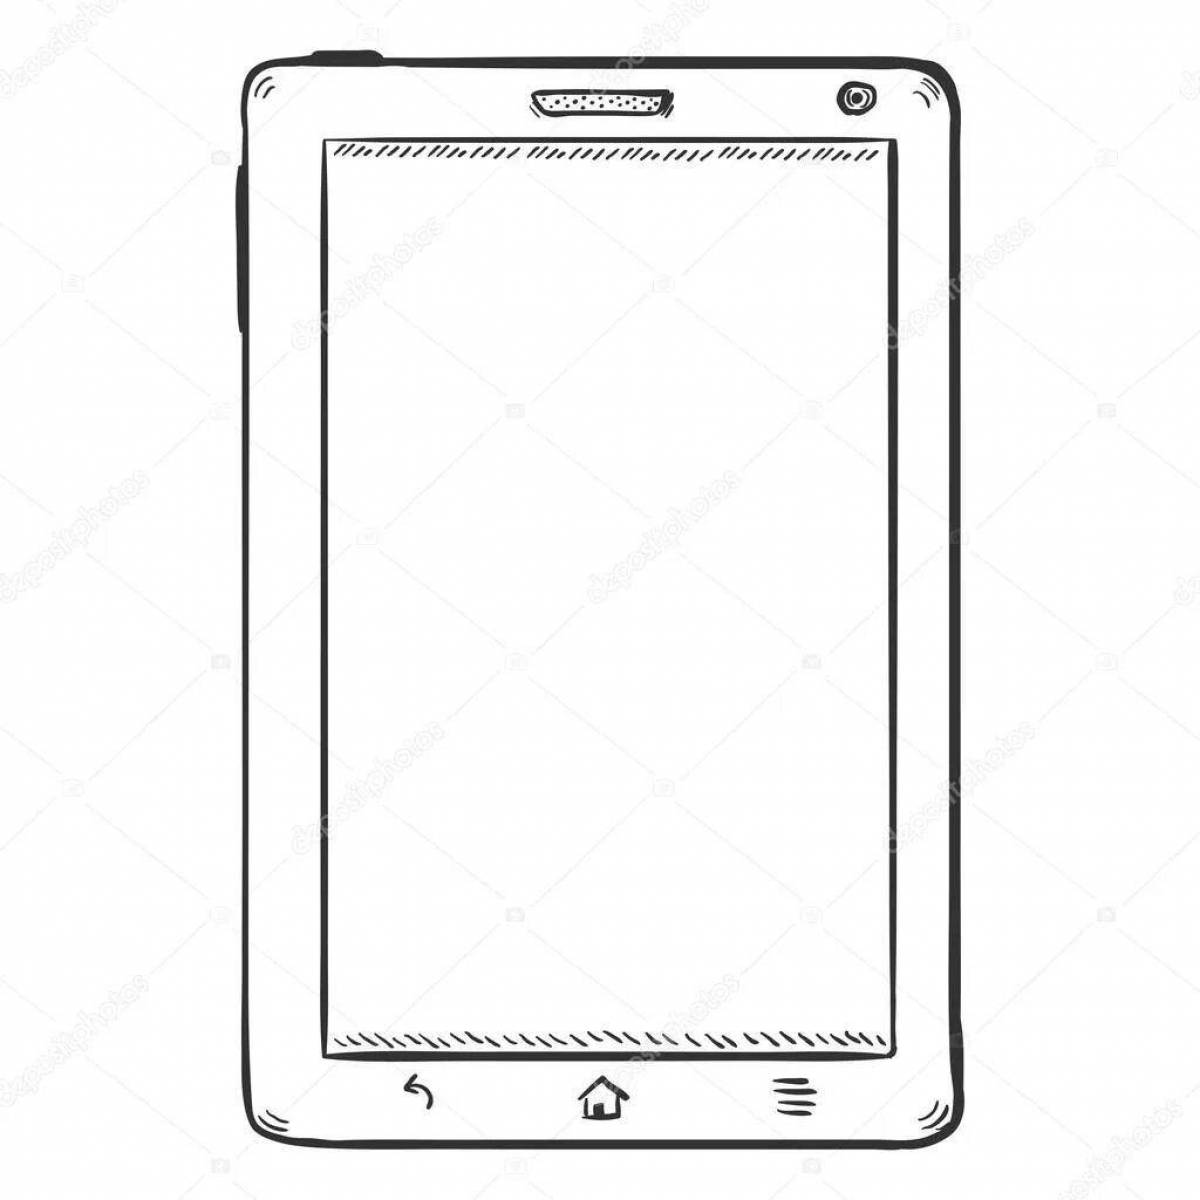 Delightful ipad coloring book with stylus